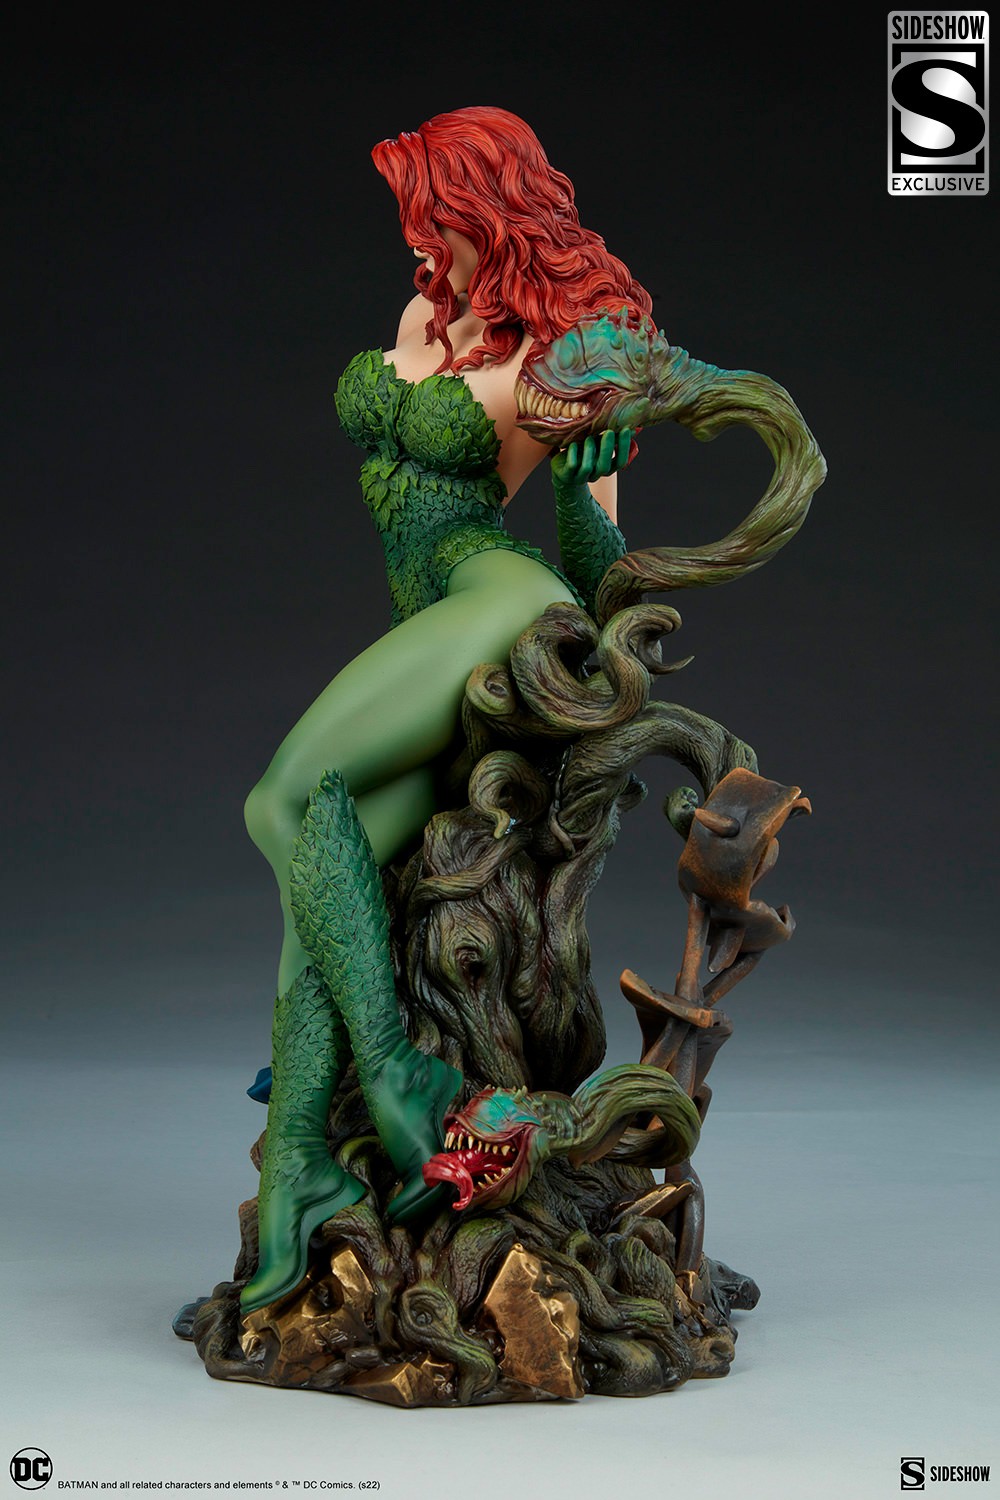 Poison Ivy Exclusive Edition (Prototype Shown) View 8